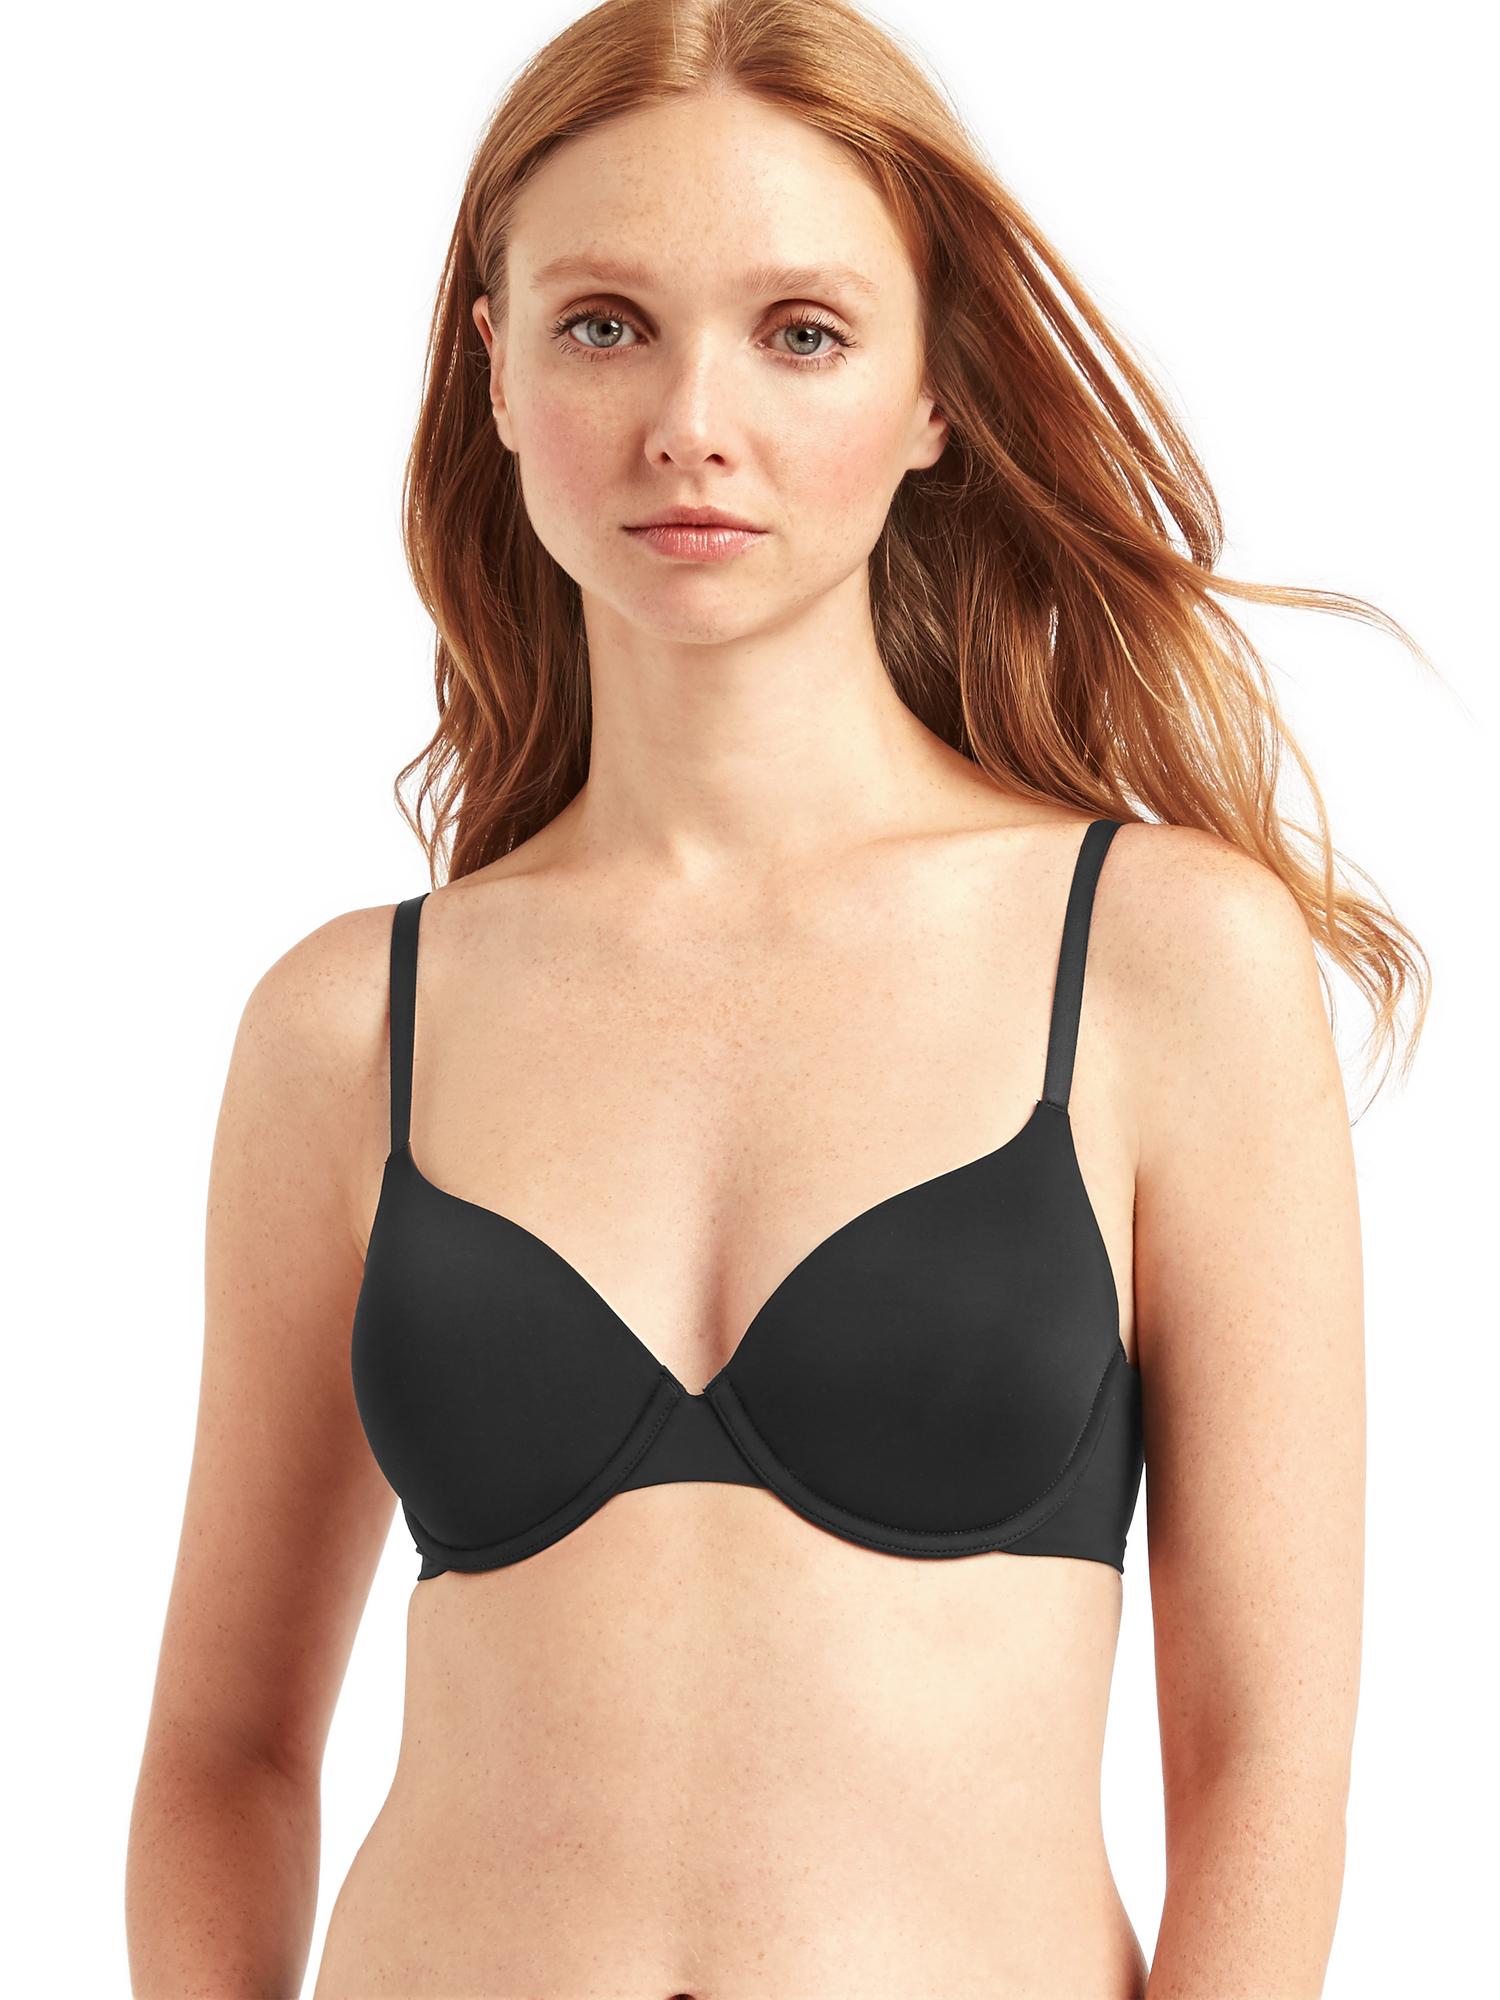 Gap Body strapless t shirt bra 36C Size undefined - $23 - From Agatha